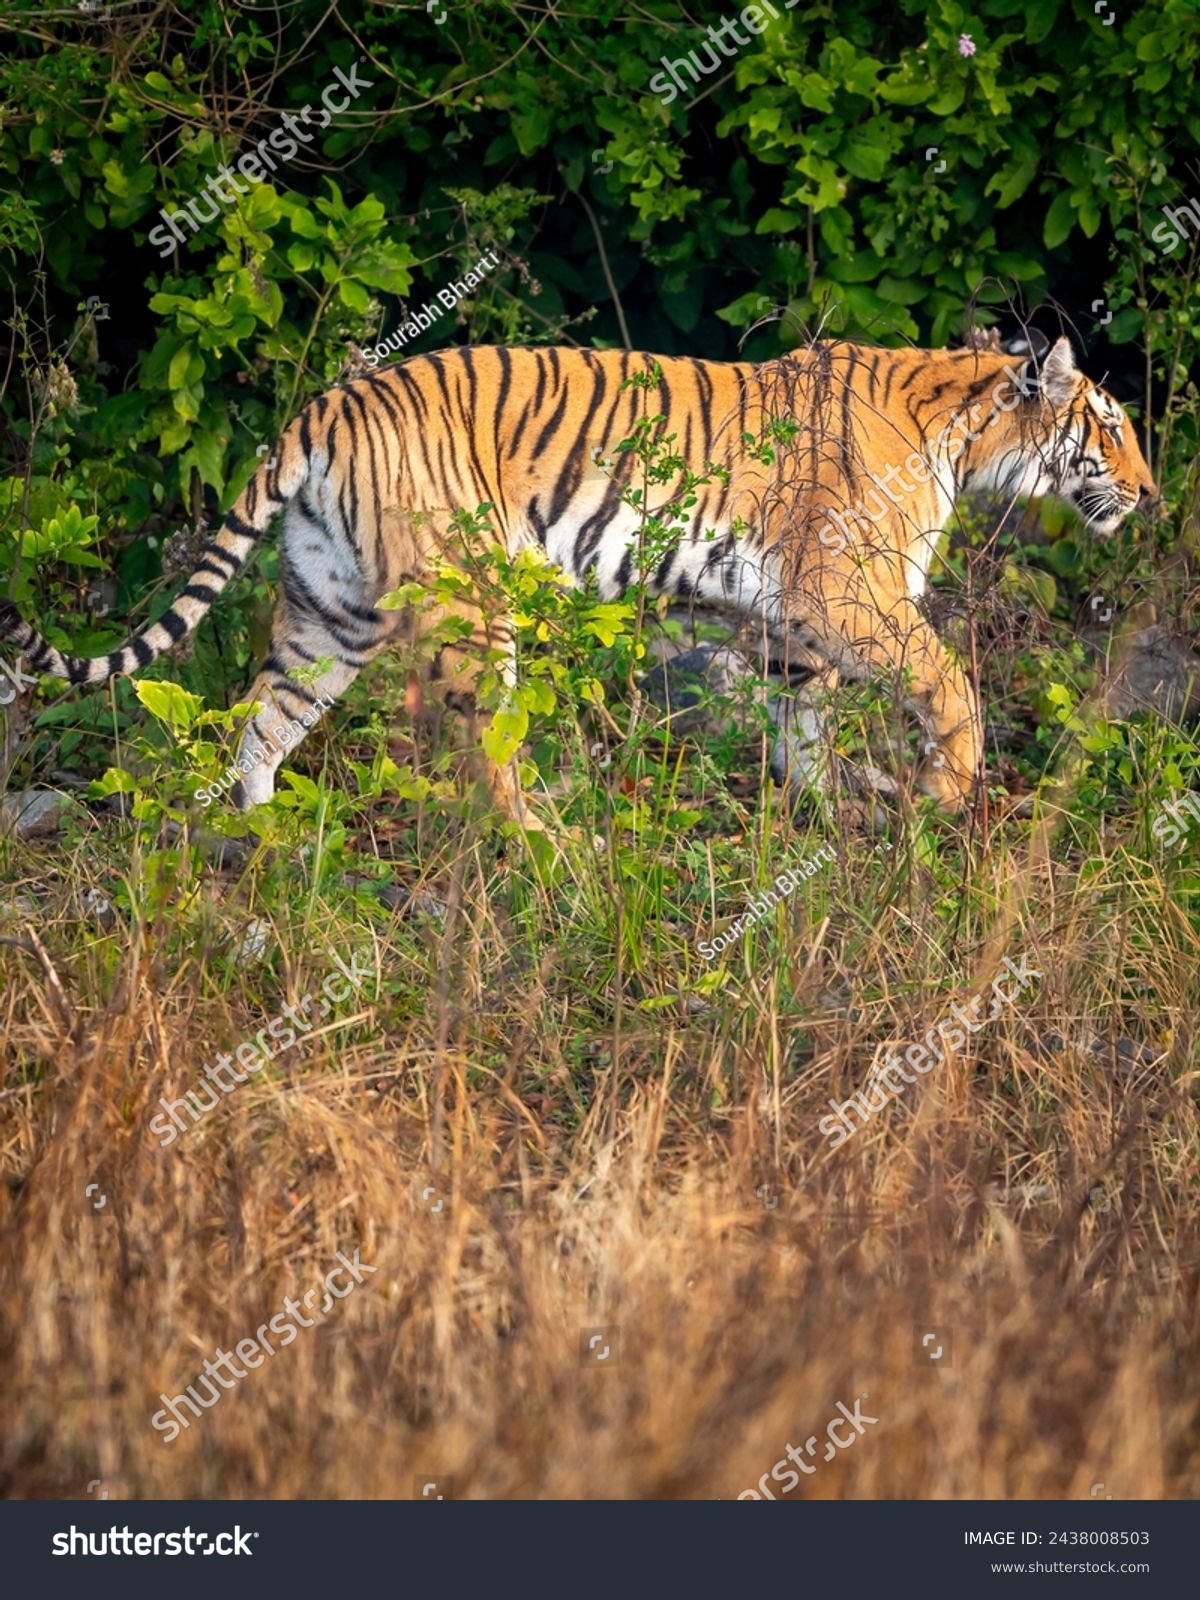 indian wild female tiger or panthera tigris side profile on territory stroll prowl walking terai region forest in natural scenic grassland in day safari at jim corbett national park uttarakhand india #2438008503